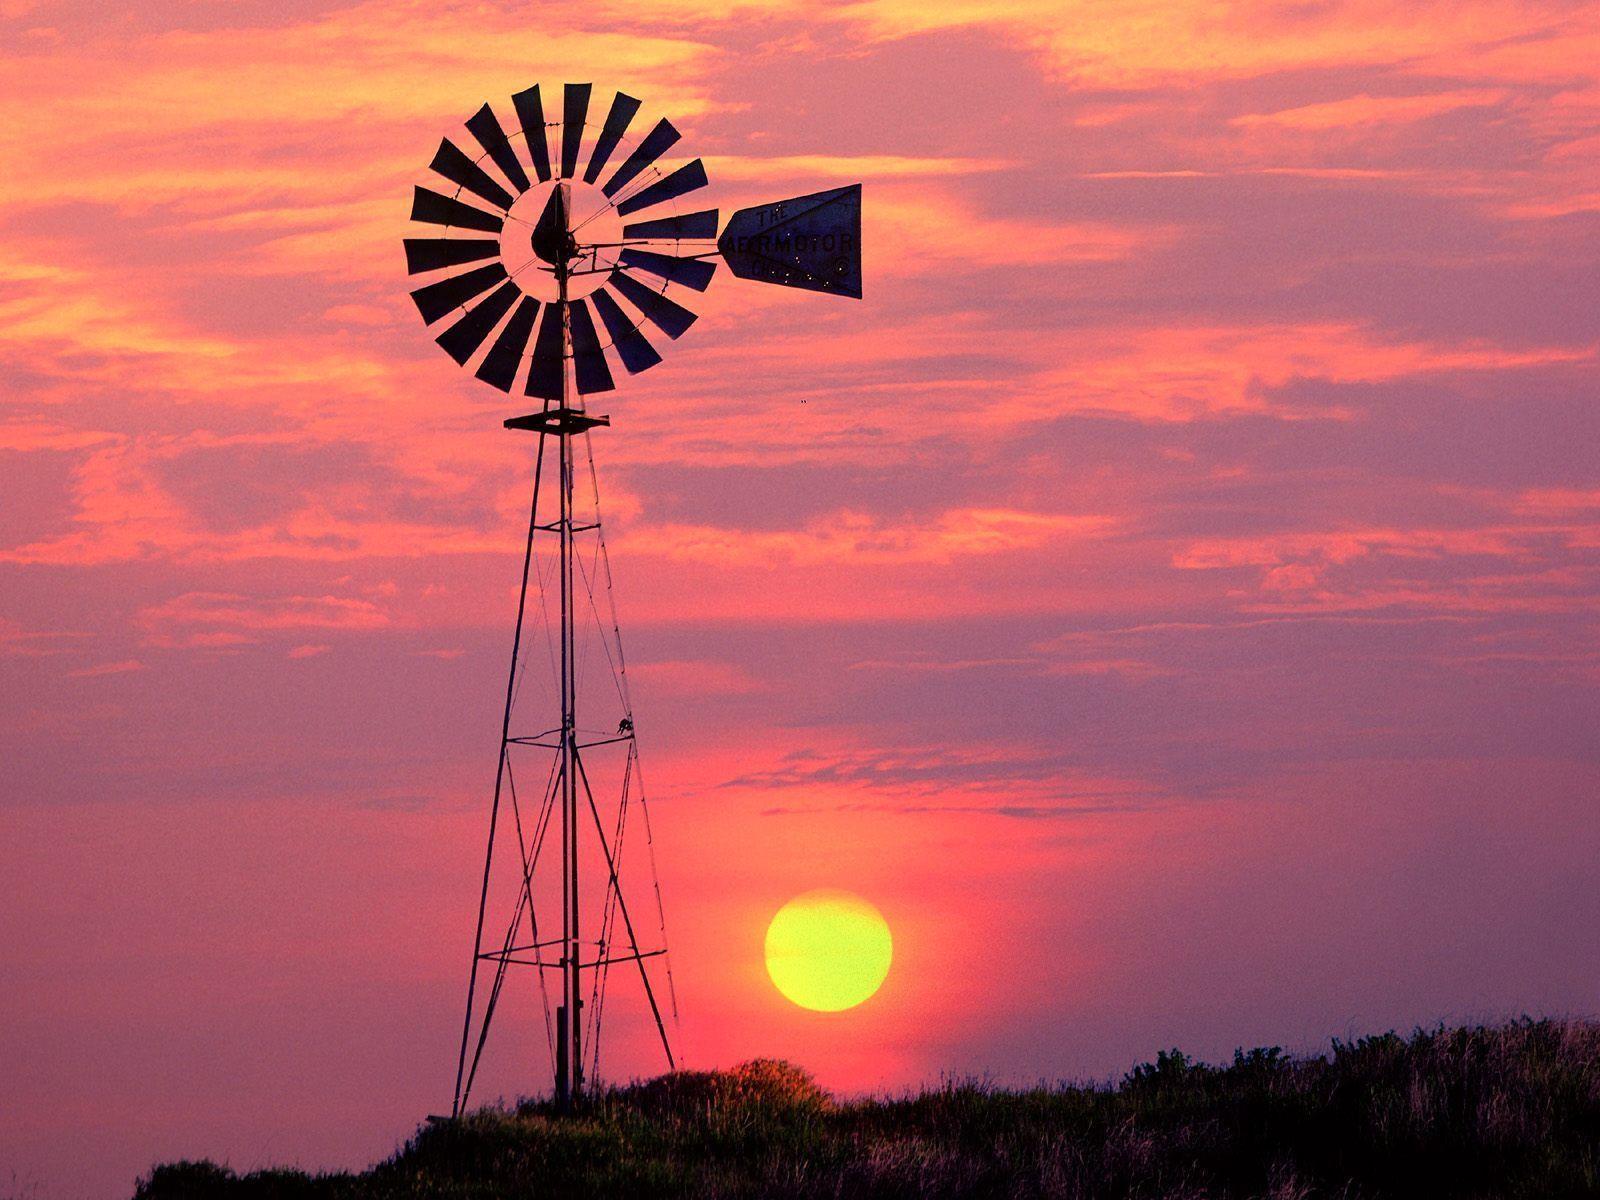 Download Windmill Picture 12753 1600x1200 px High Resolution